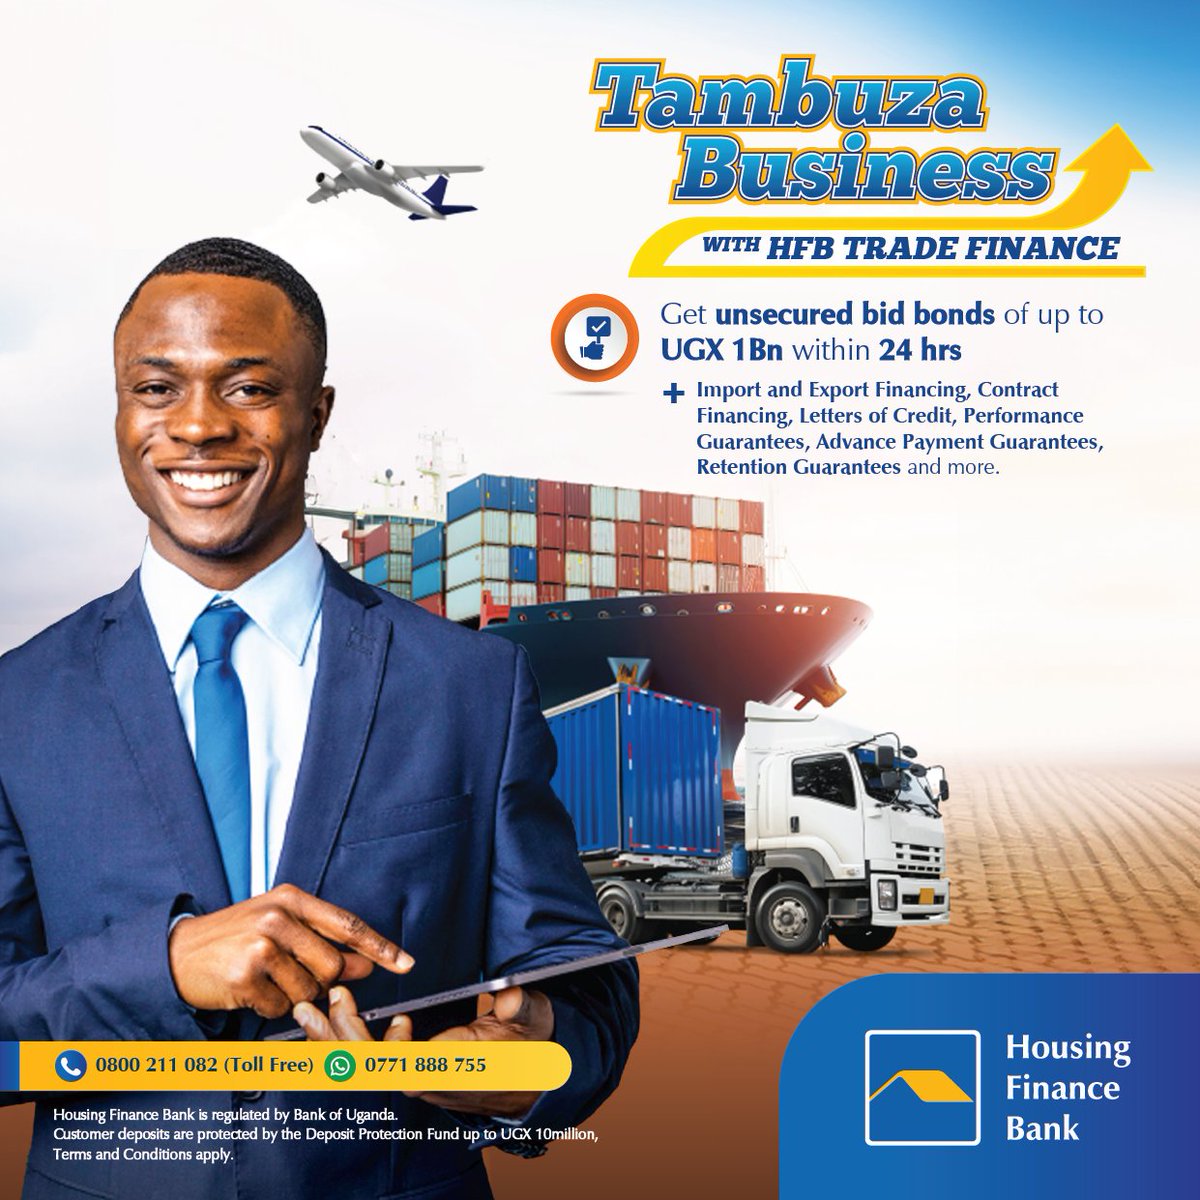 Our trade finance solutions are designed to support your business in reaching its goals. Apply today to get up to UGX 1 billion in unsecured bid bonds within 24 hours and more. Call us on 0800 211 082 to learn more. #WeMakeItEasy